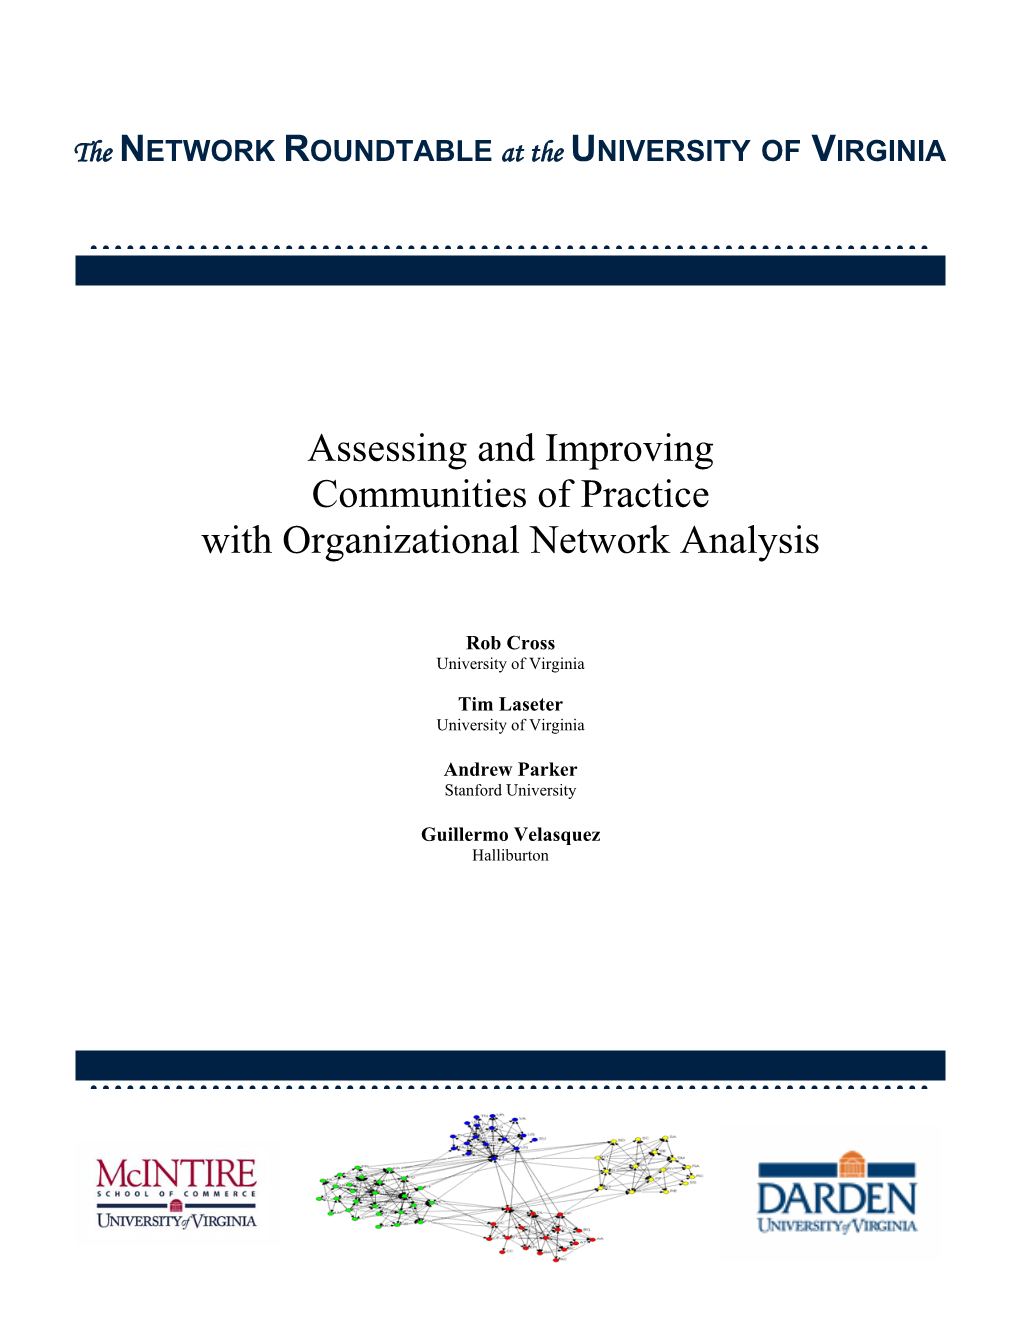 Assessing and Improving Communities of Practice with Organizational Network Analysis